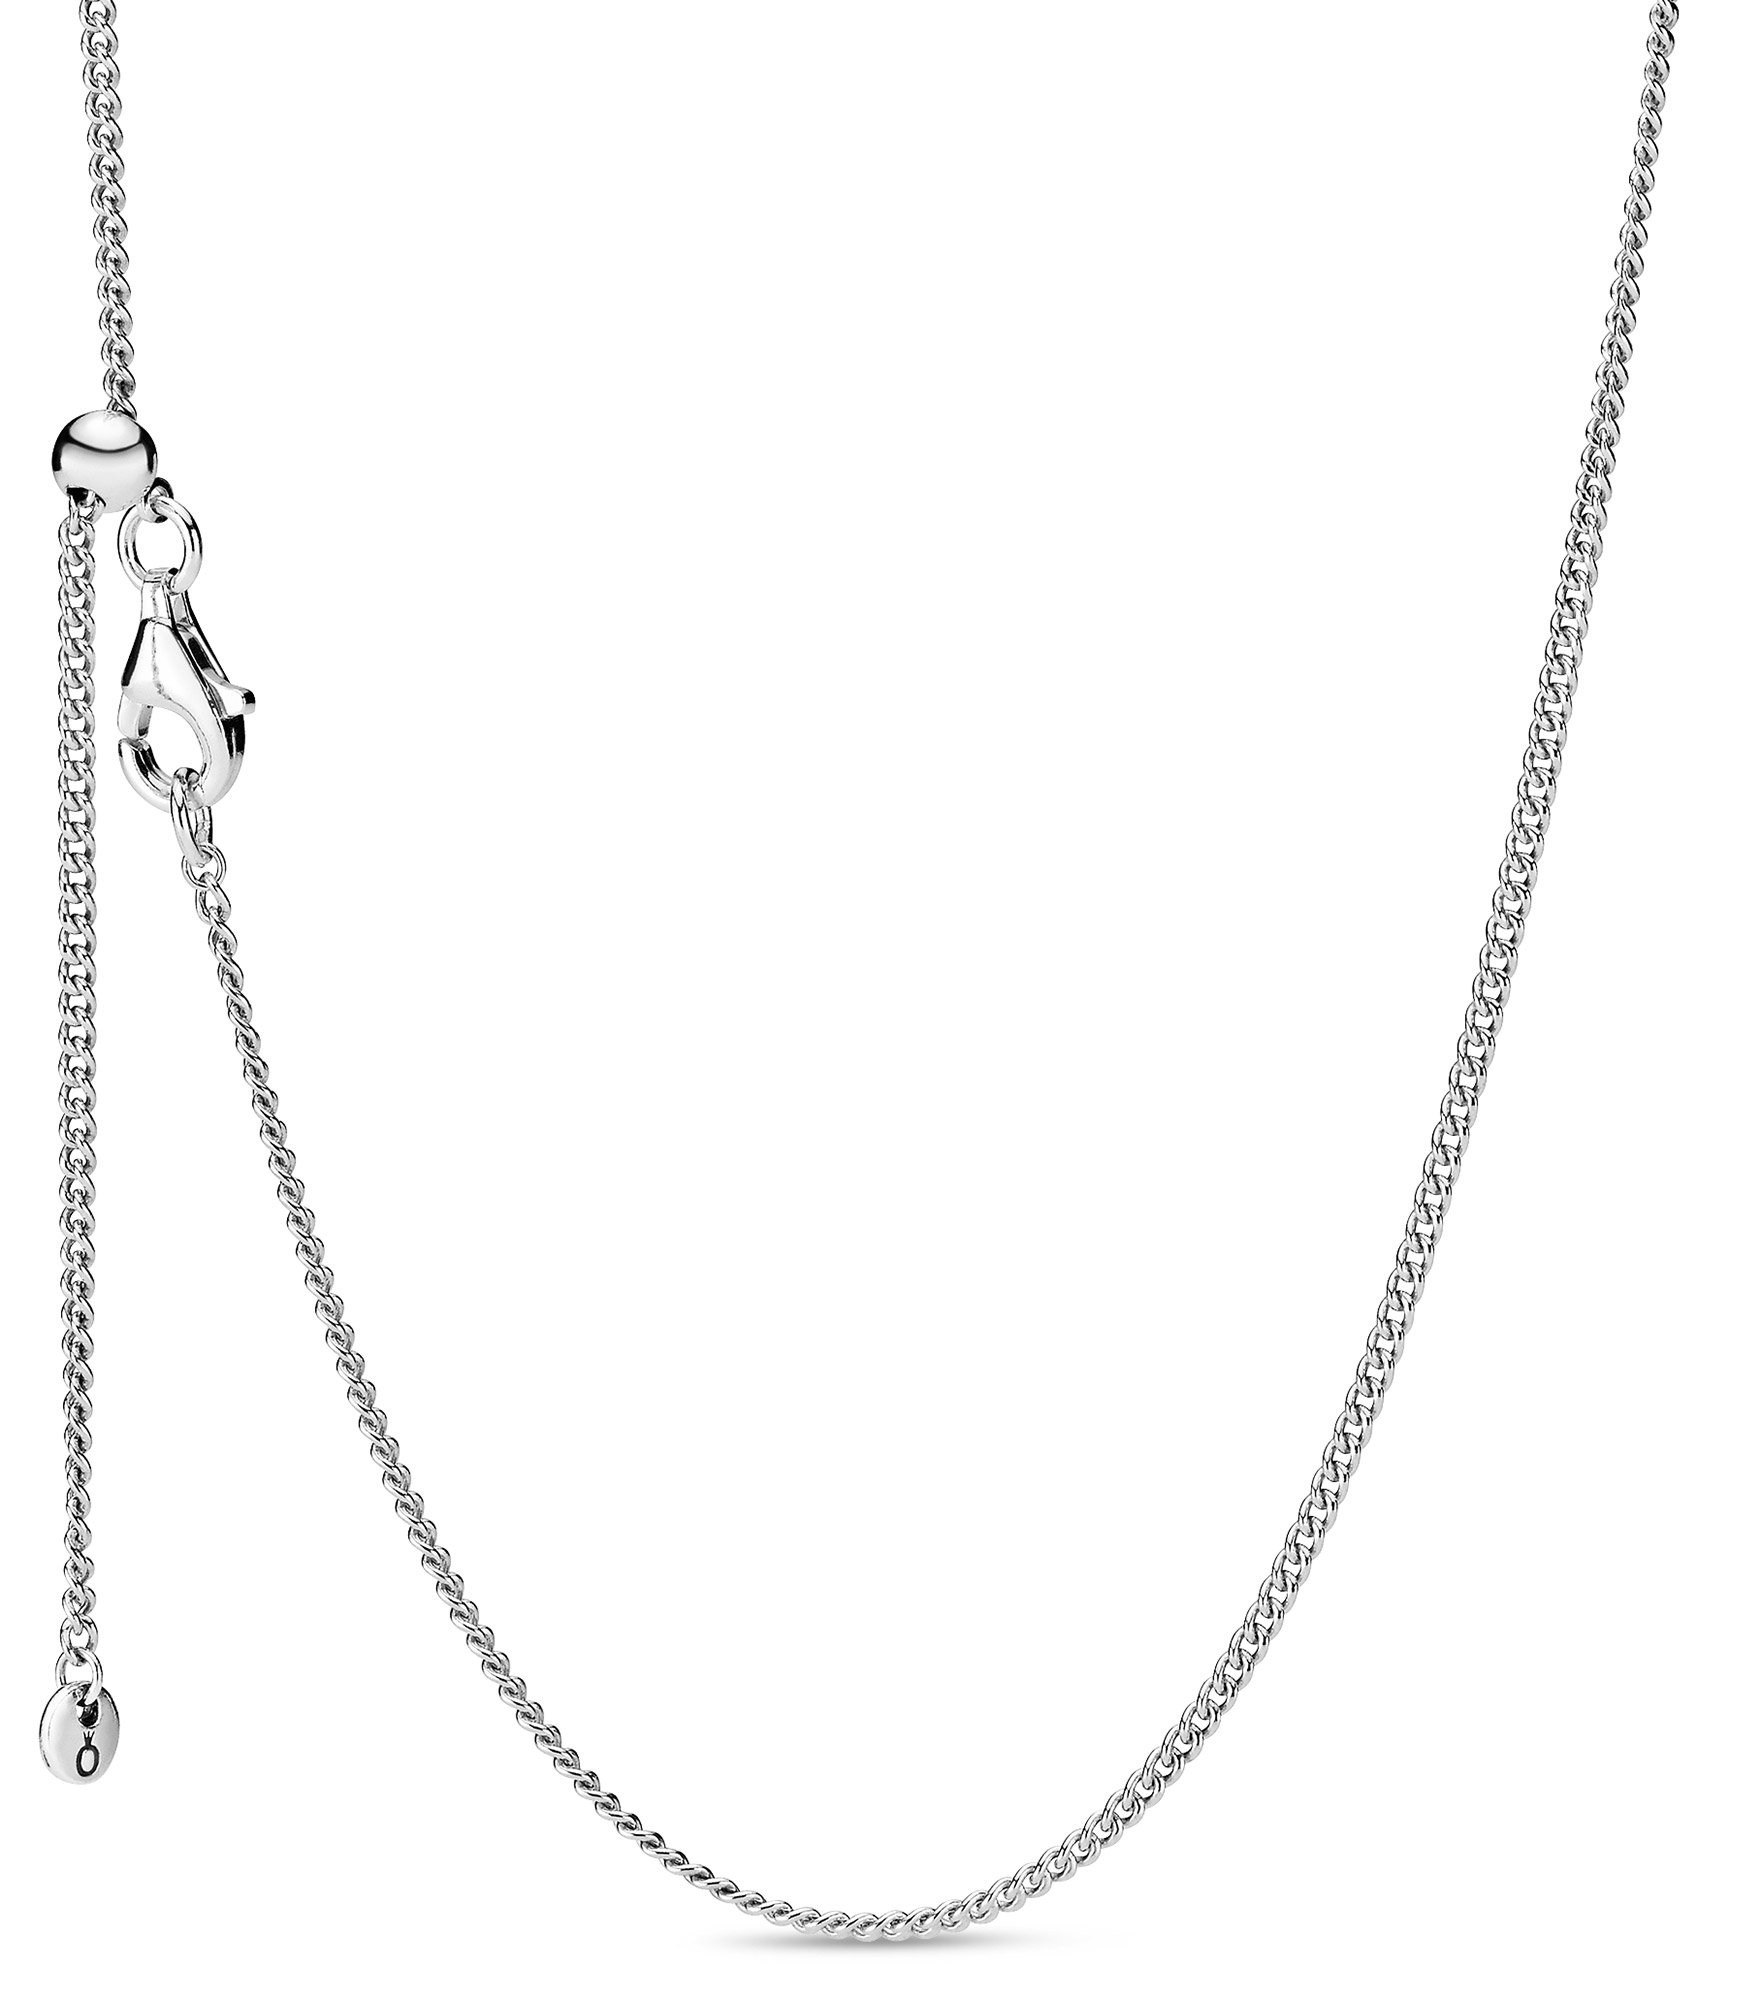 Necklace 頸鏈– Page 3 – solobuybuy